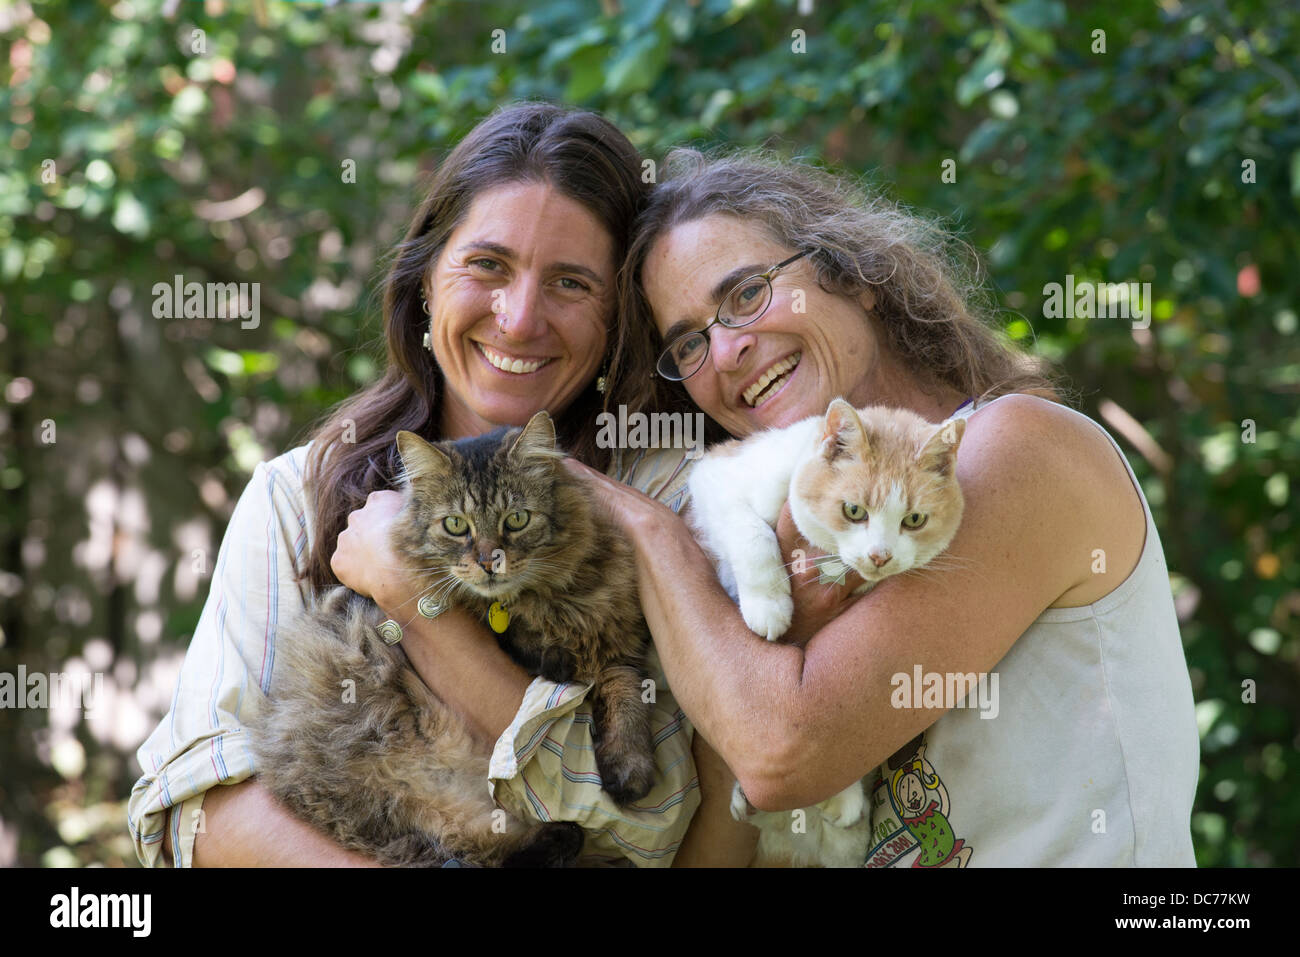 Women with cats, Oregon. Stock Photo